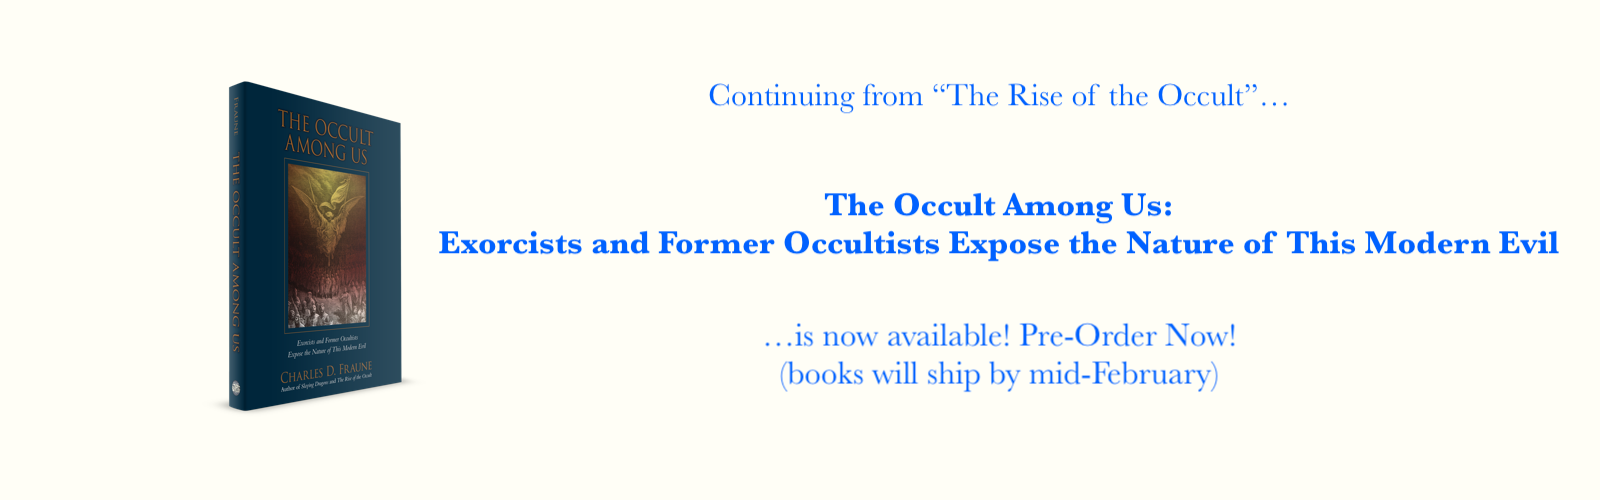 Announcing a new book: "The Occult Among Us"!